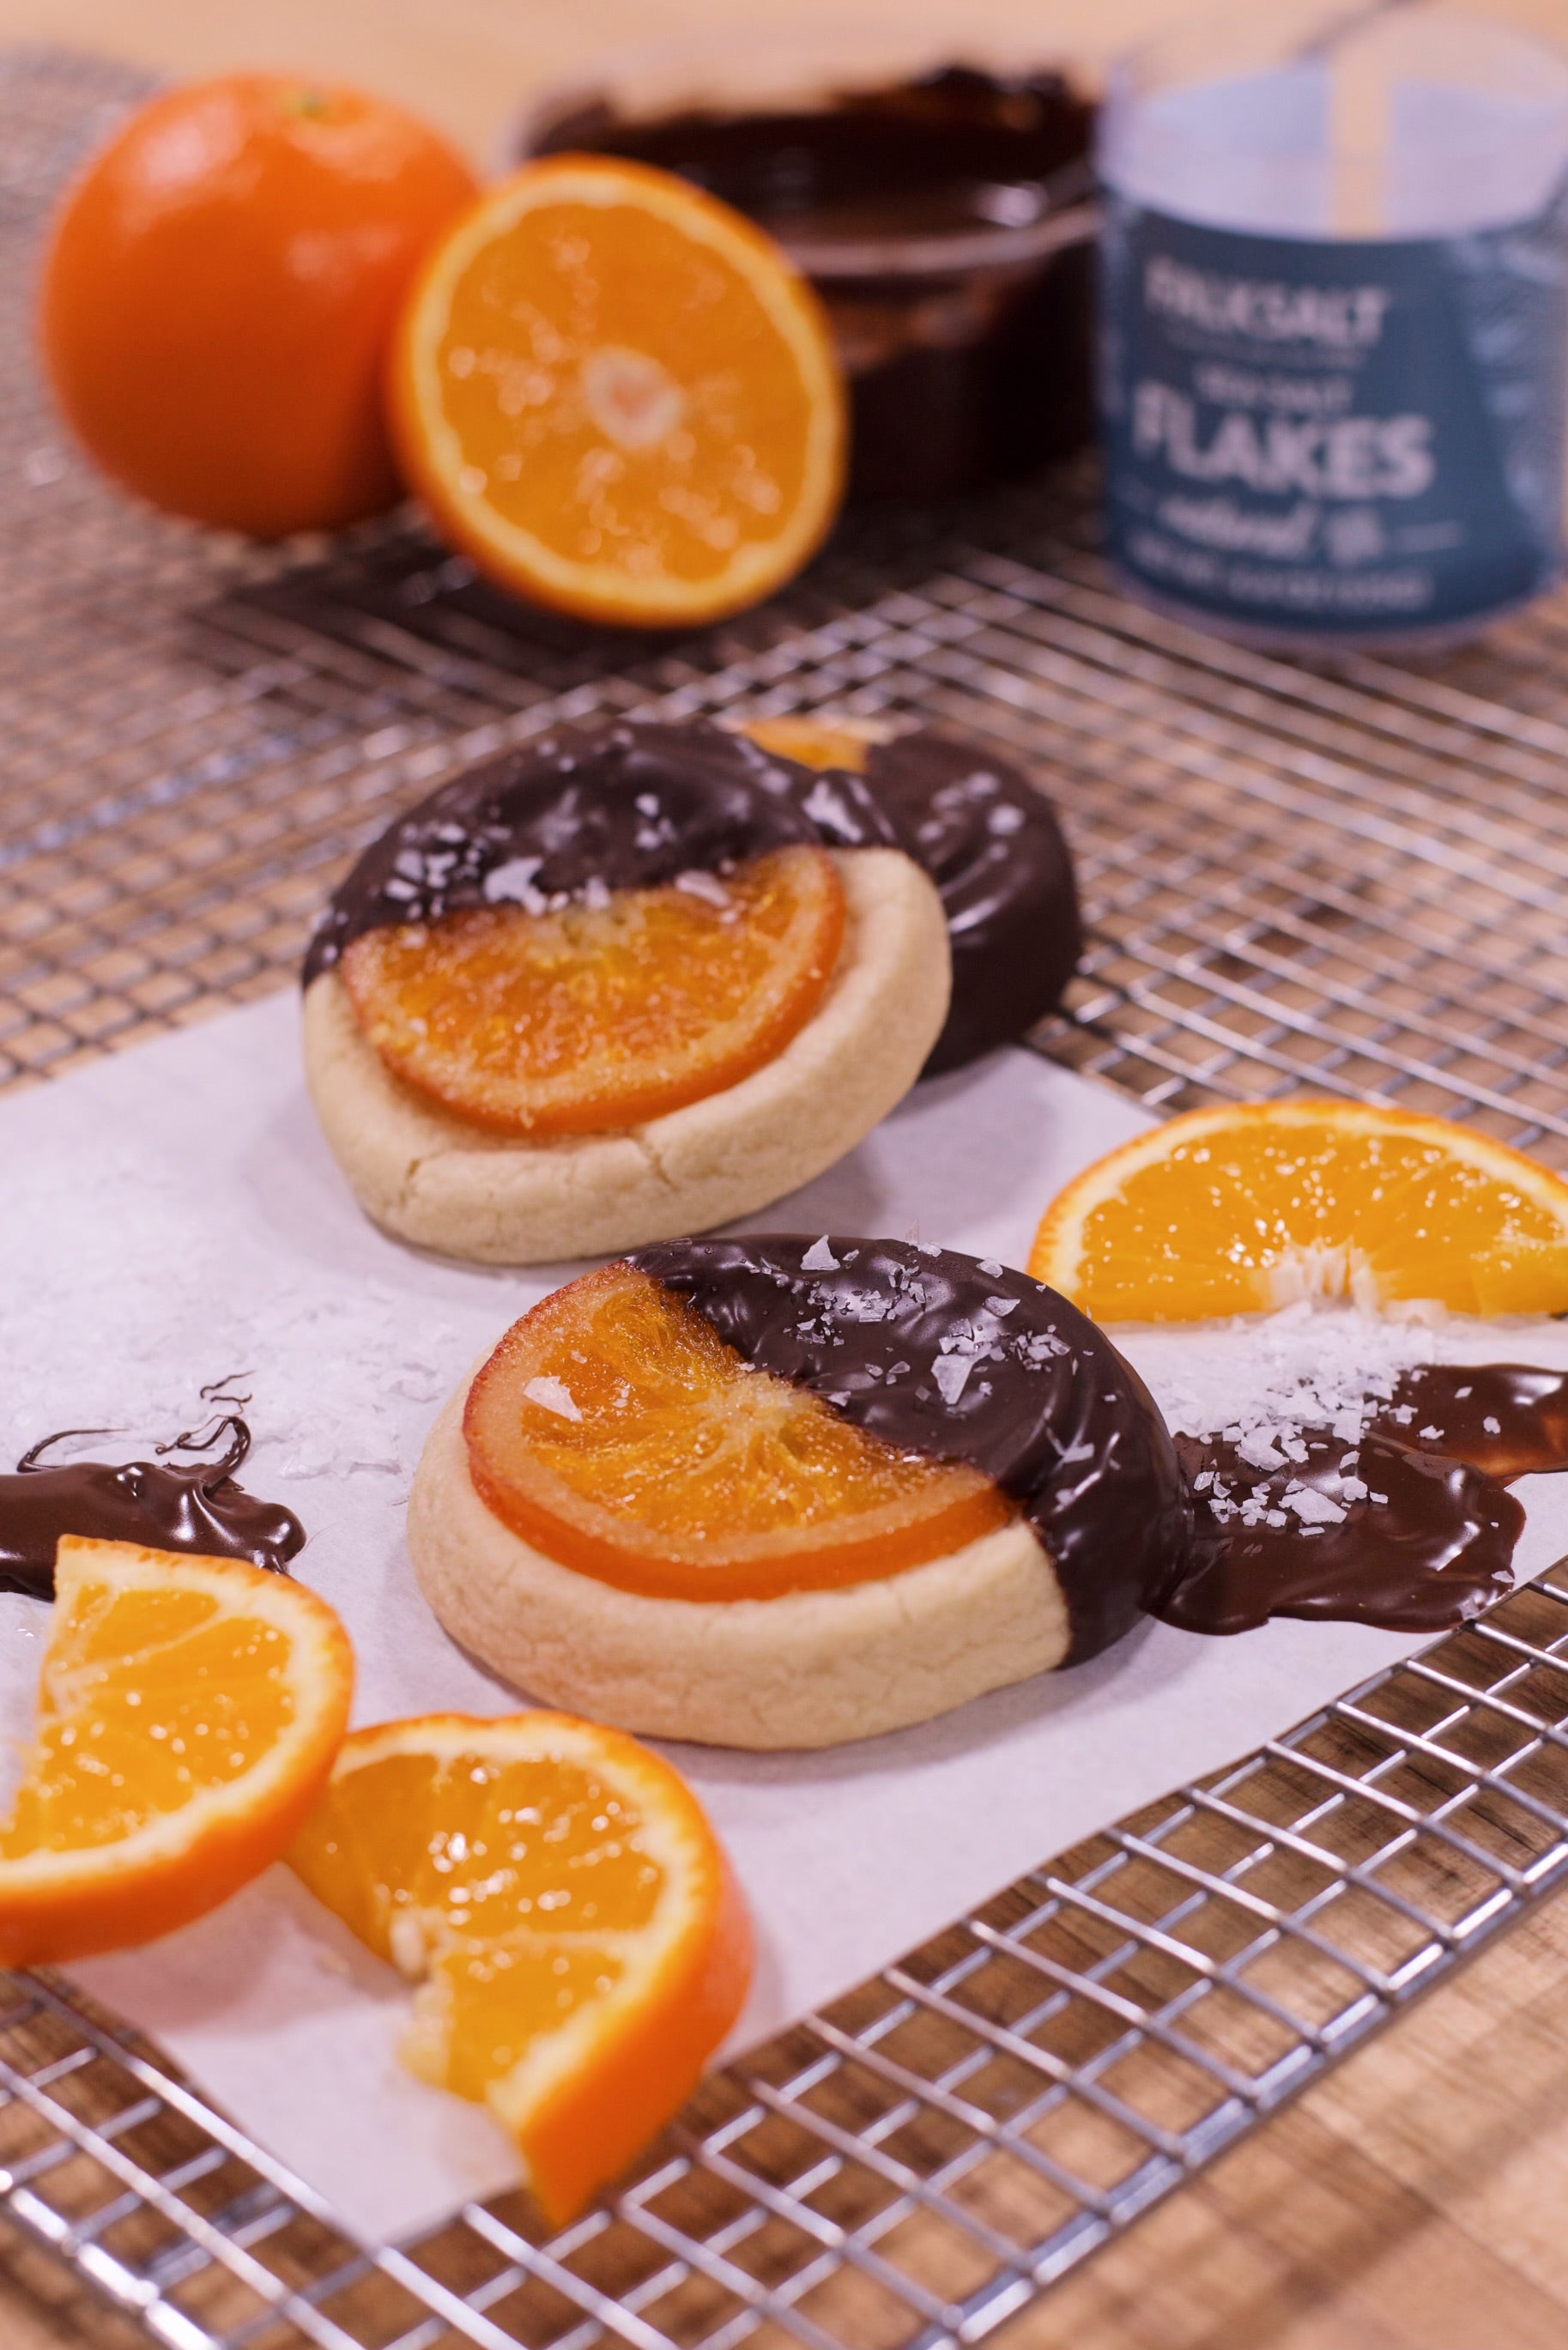 March FOTM Cookies (Salted Dark Chocolate + Candied Orange) - One time purchase